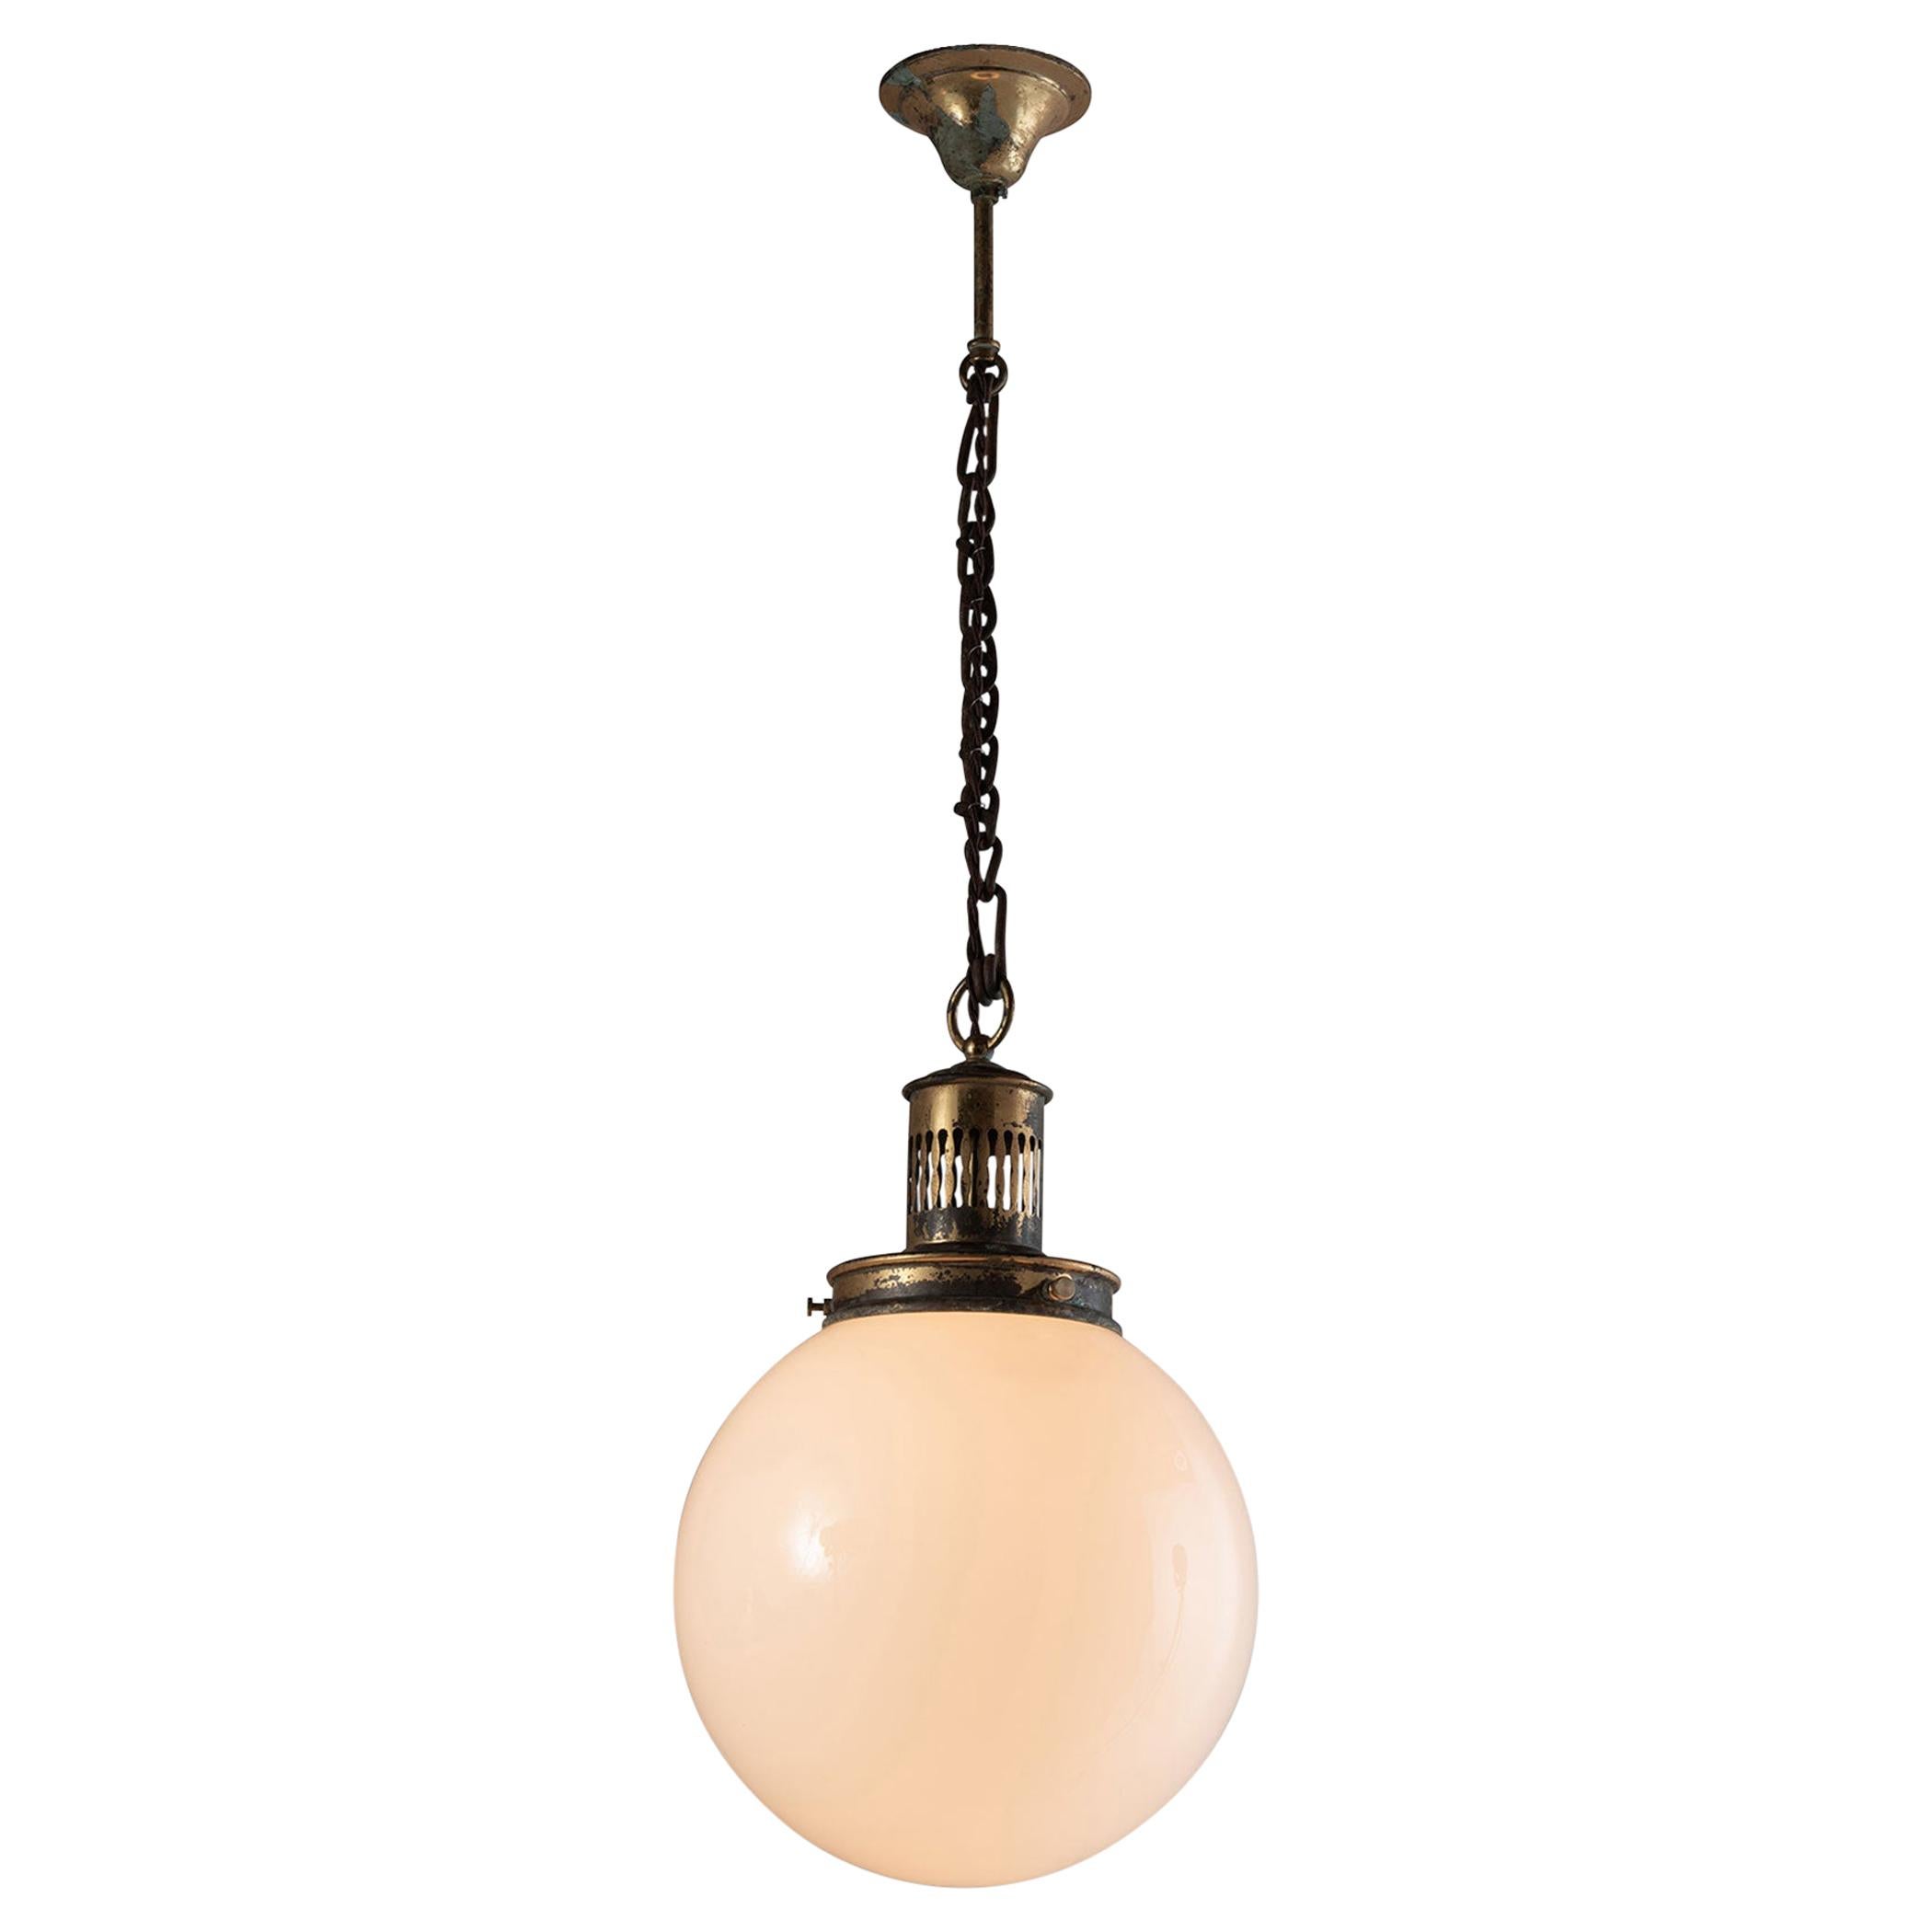 Opaline globe pendant with brass fitter and canopy.

 